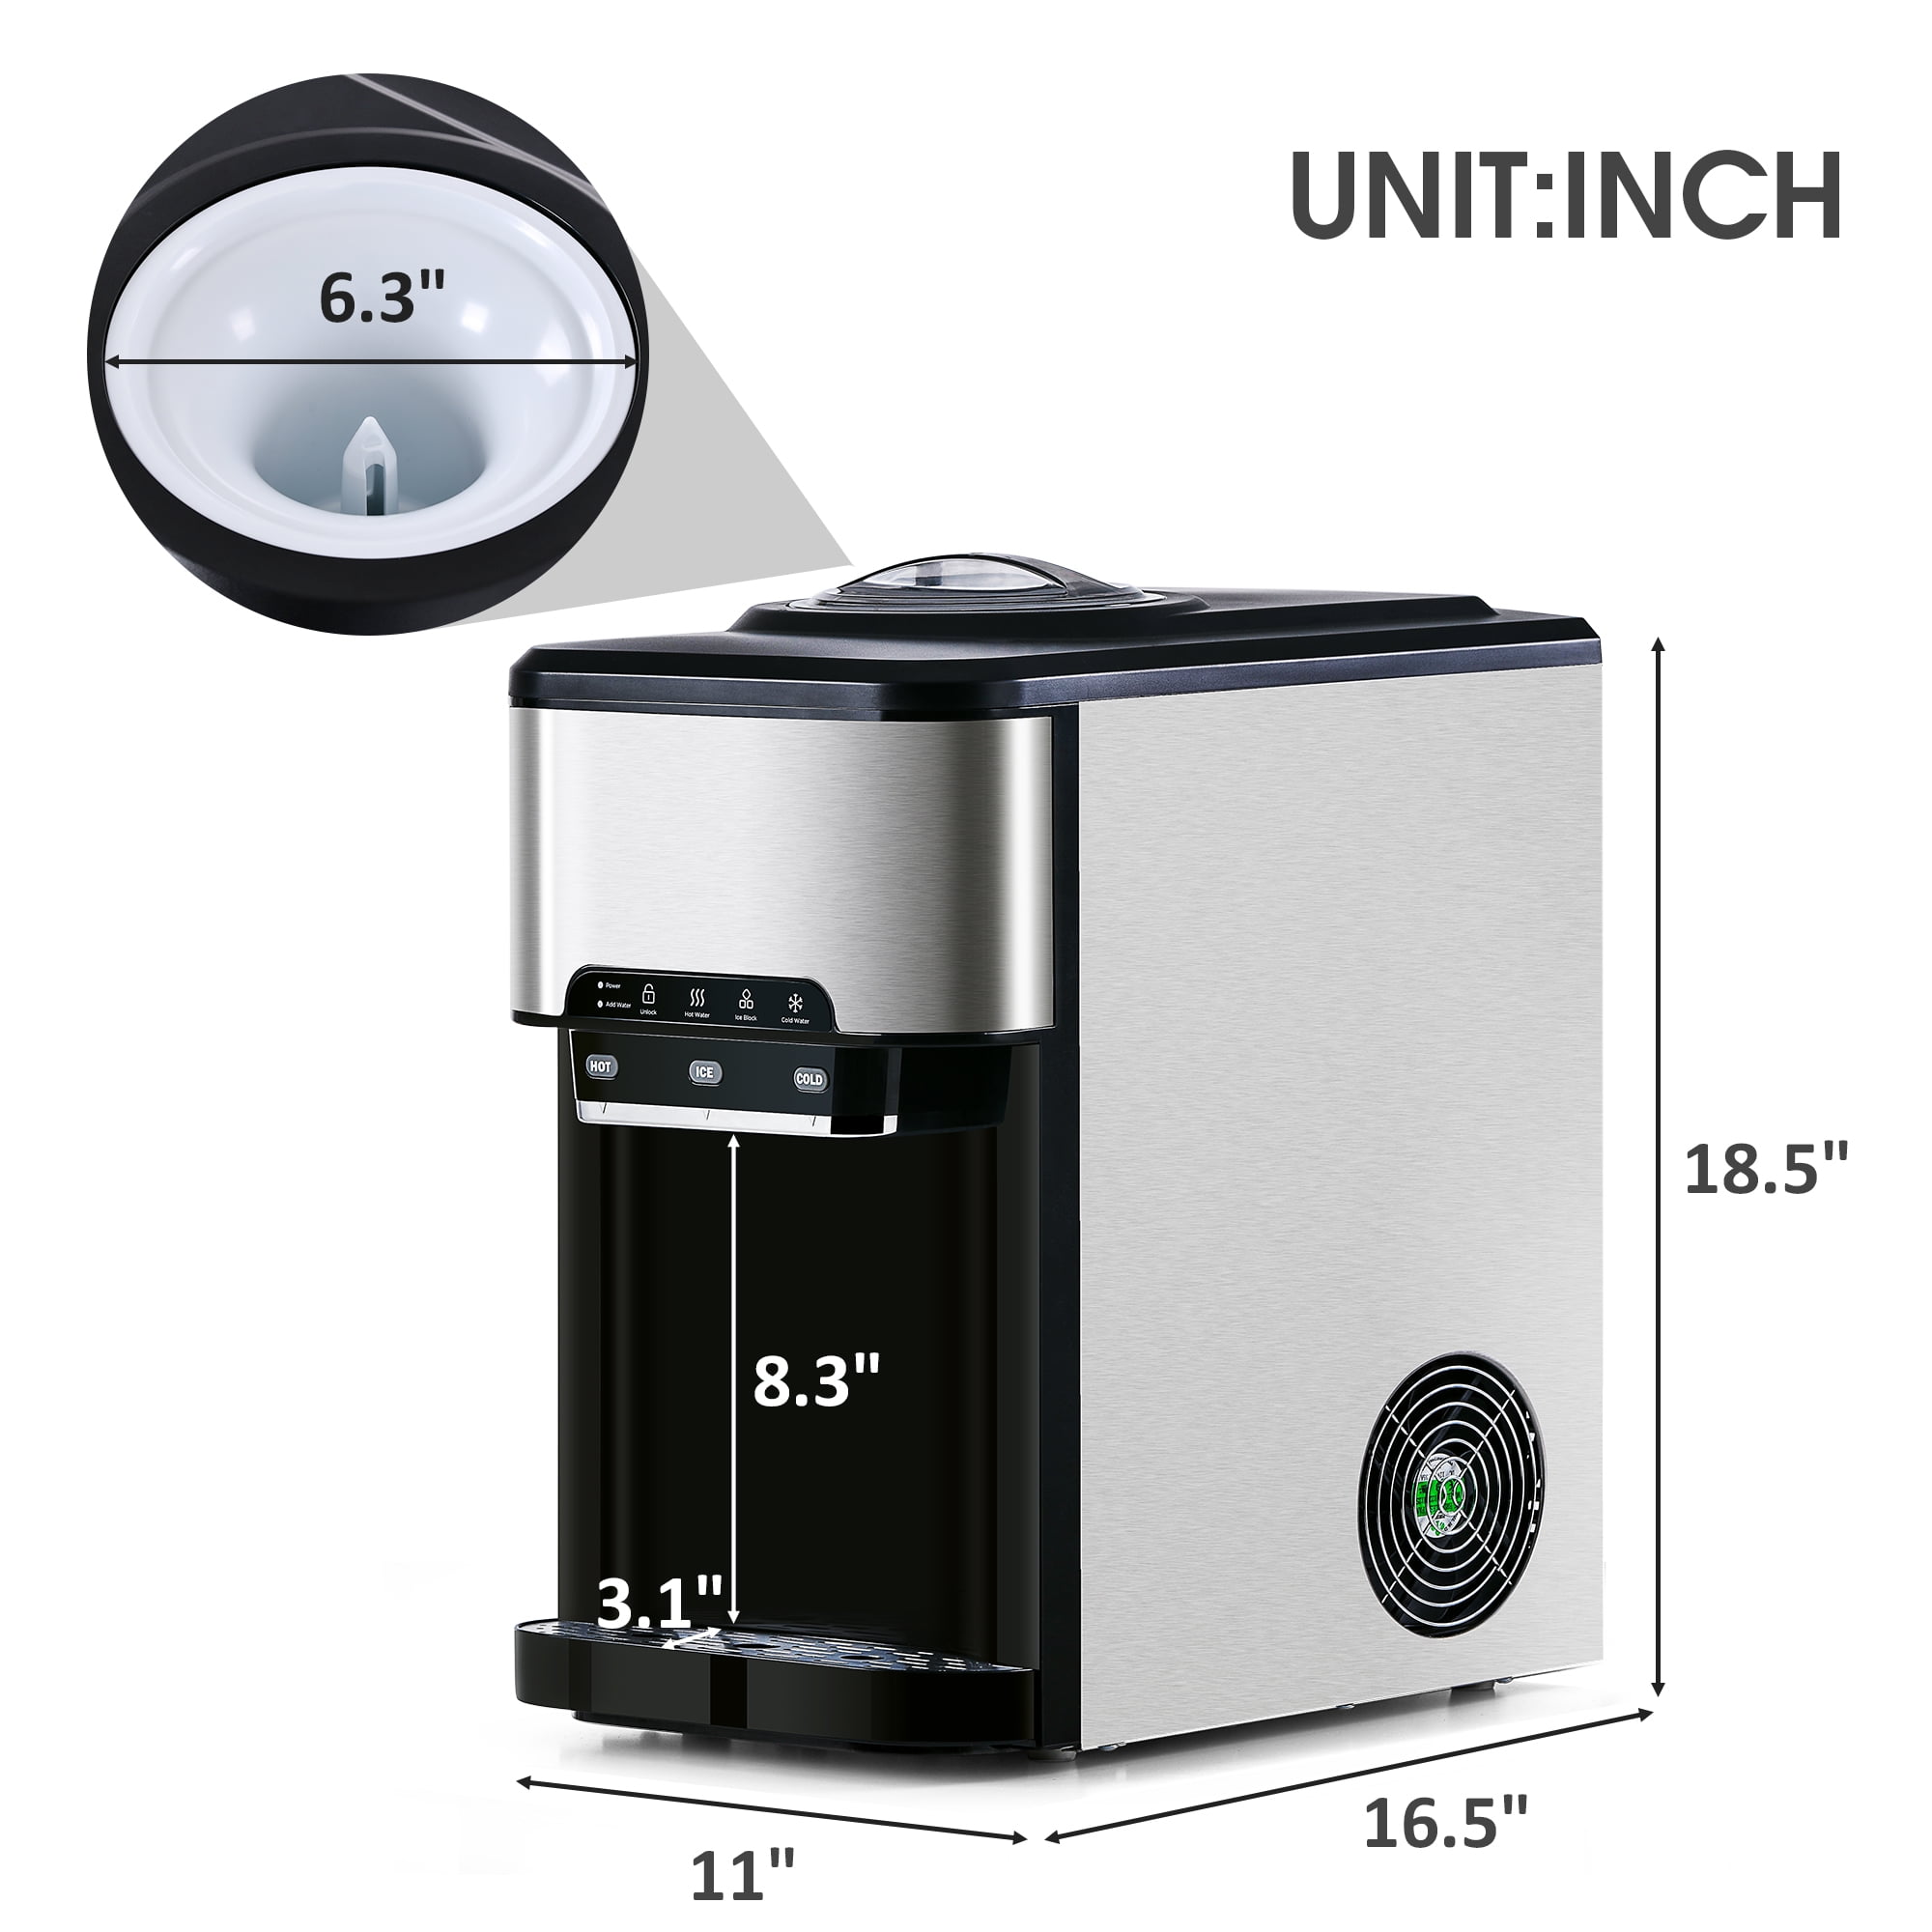 3-in-1 Water Cooler Dispenser with Built-in Ice Maker and 3 Temperature Setting